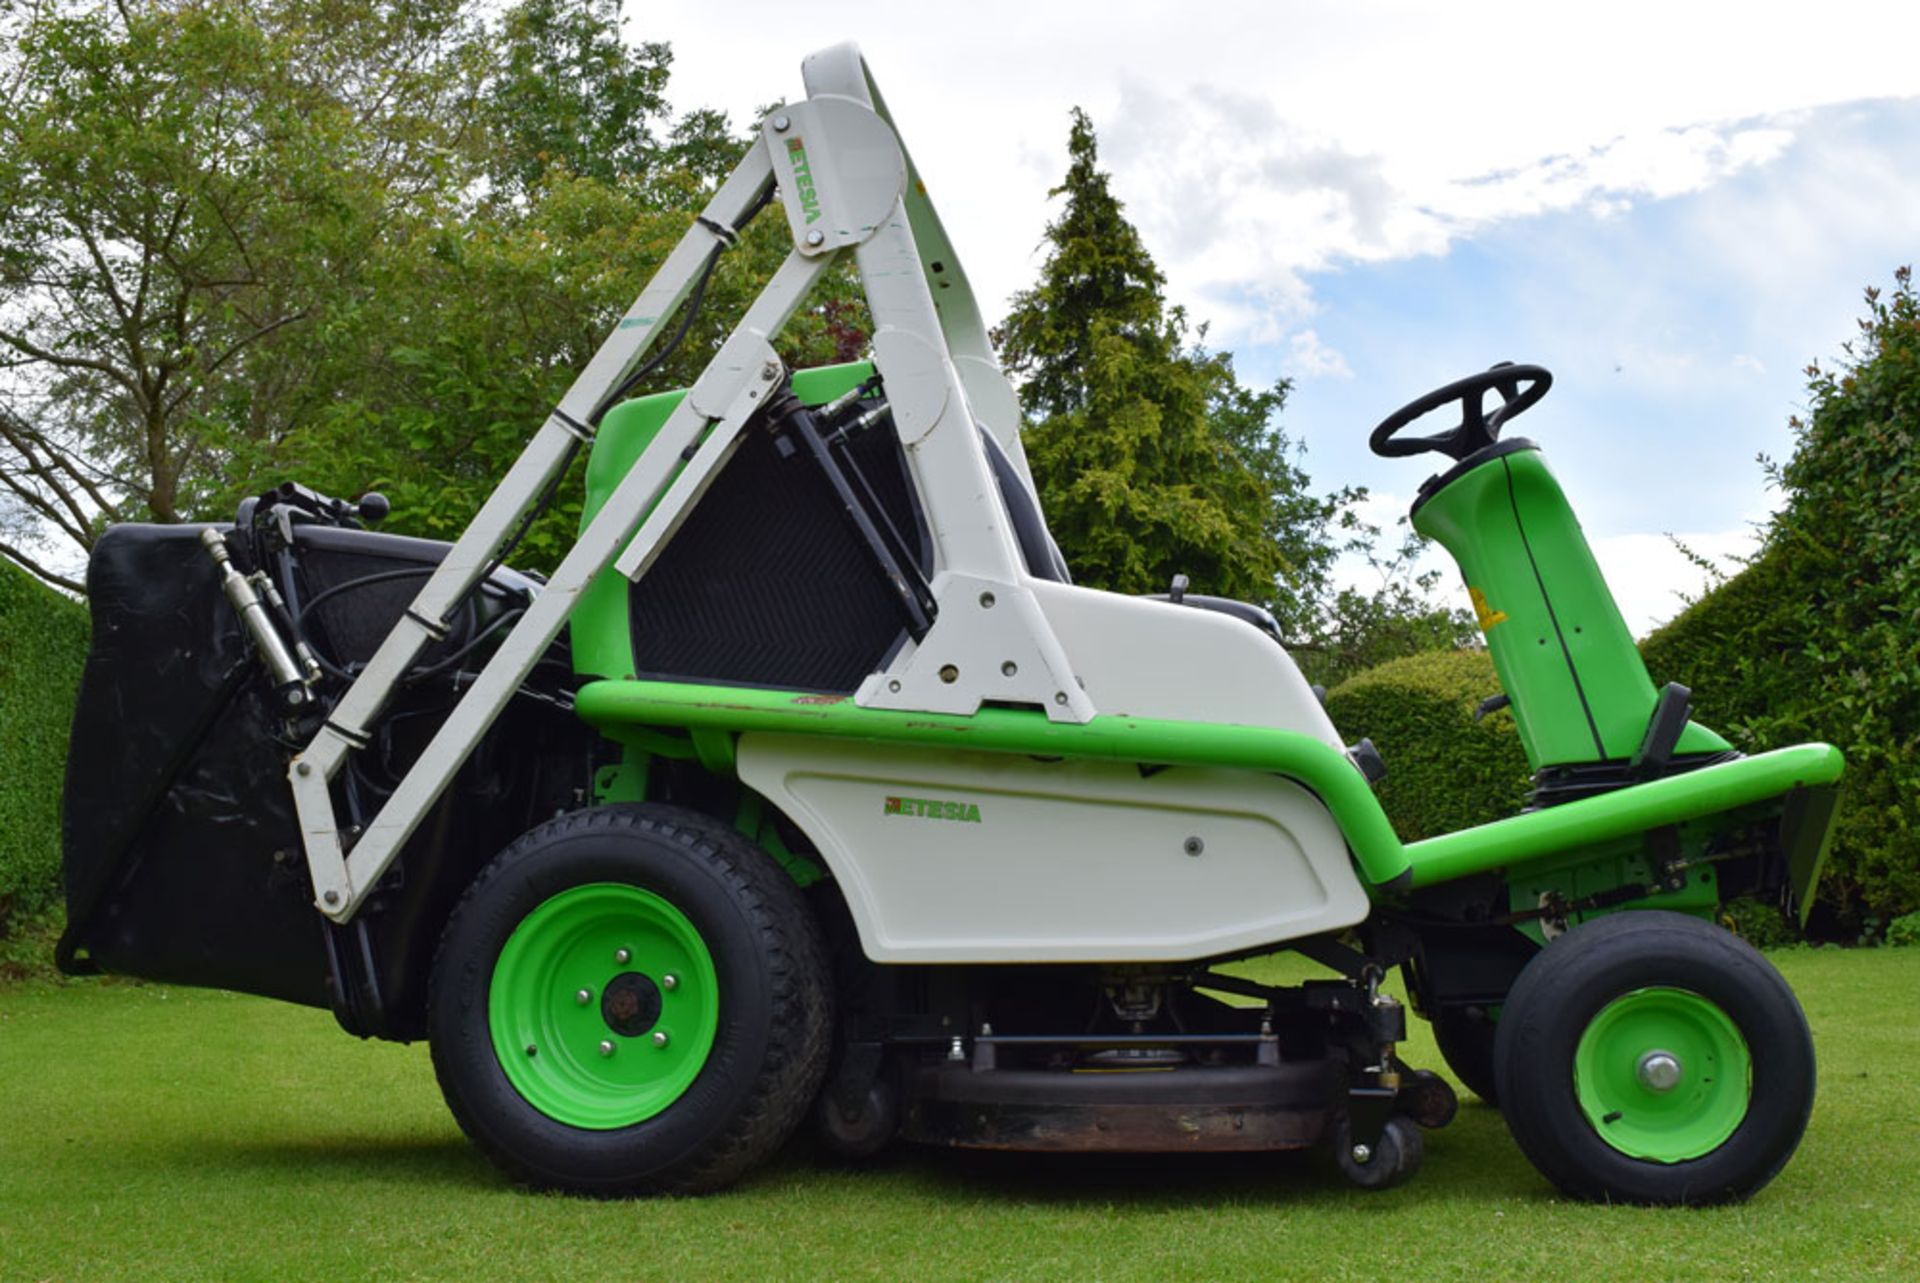 Etesia Hydro 124DS Ride On Rotary Mower - Image 2 of 3